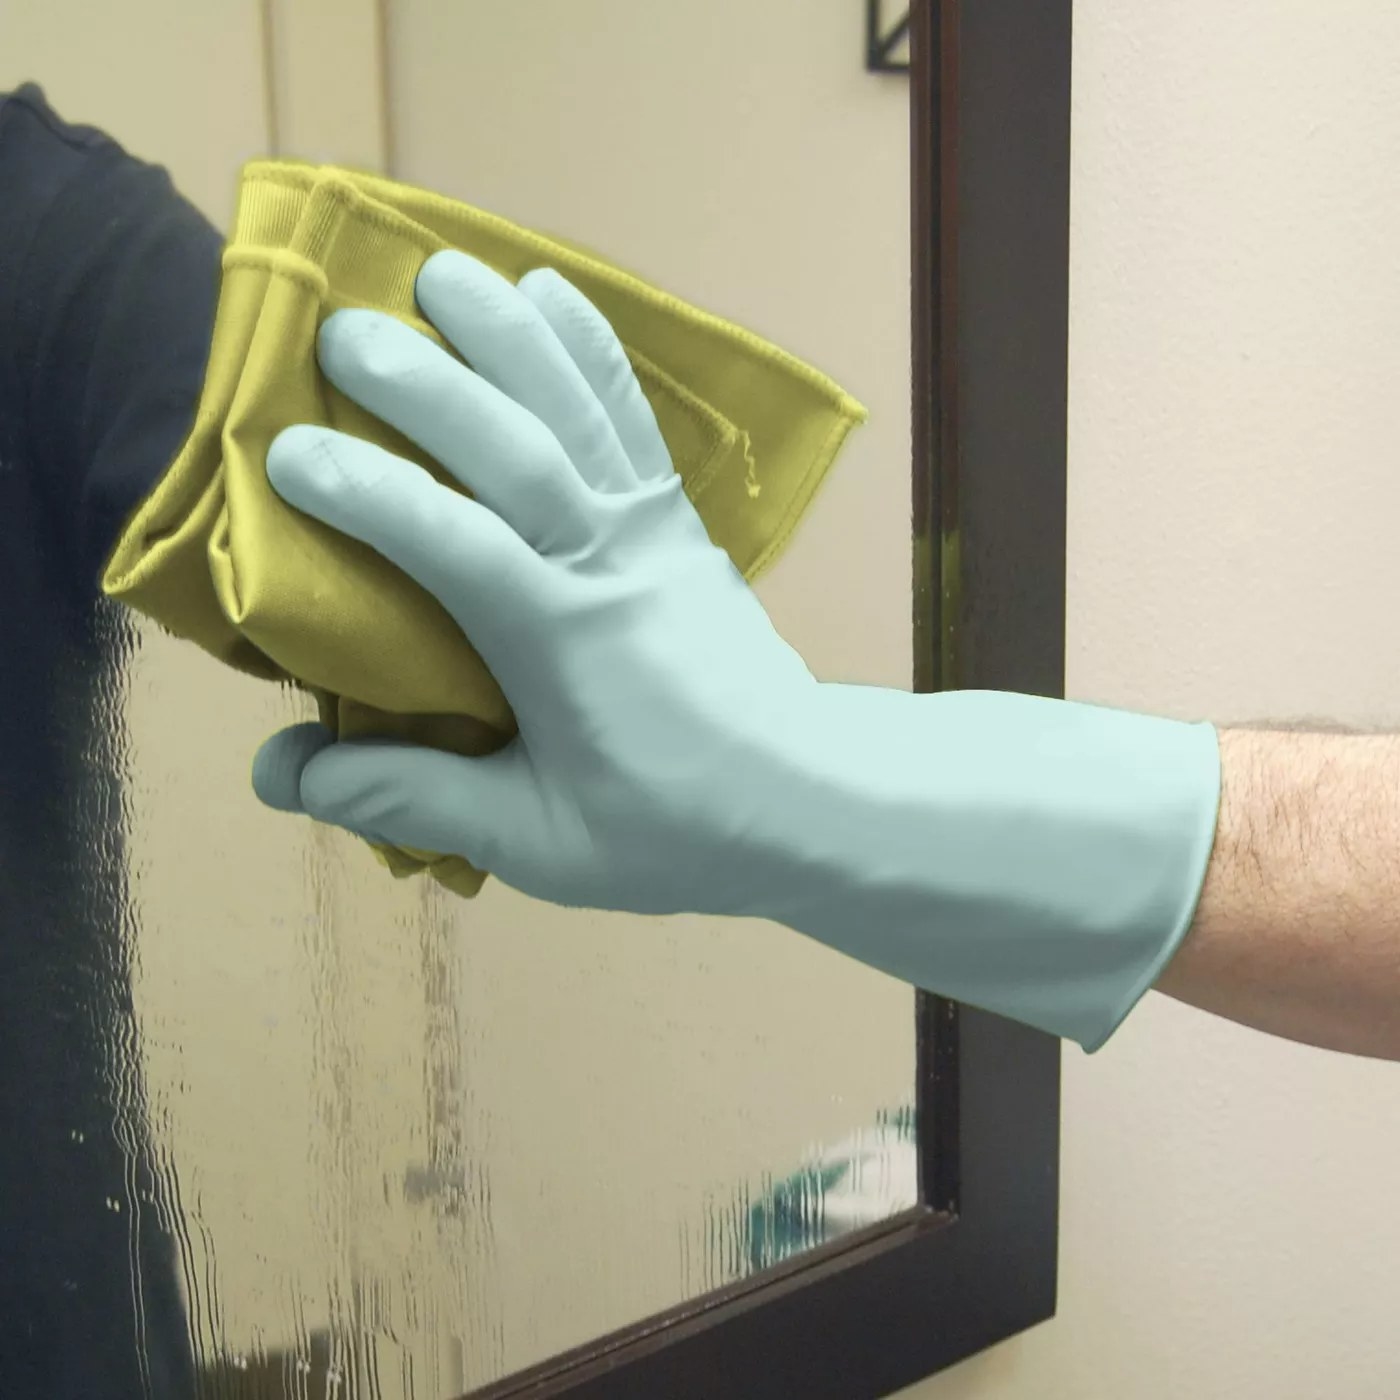 A model wearing a pair of light blue gloves wiping down a mirror